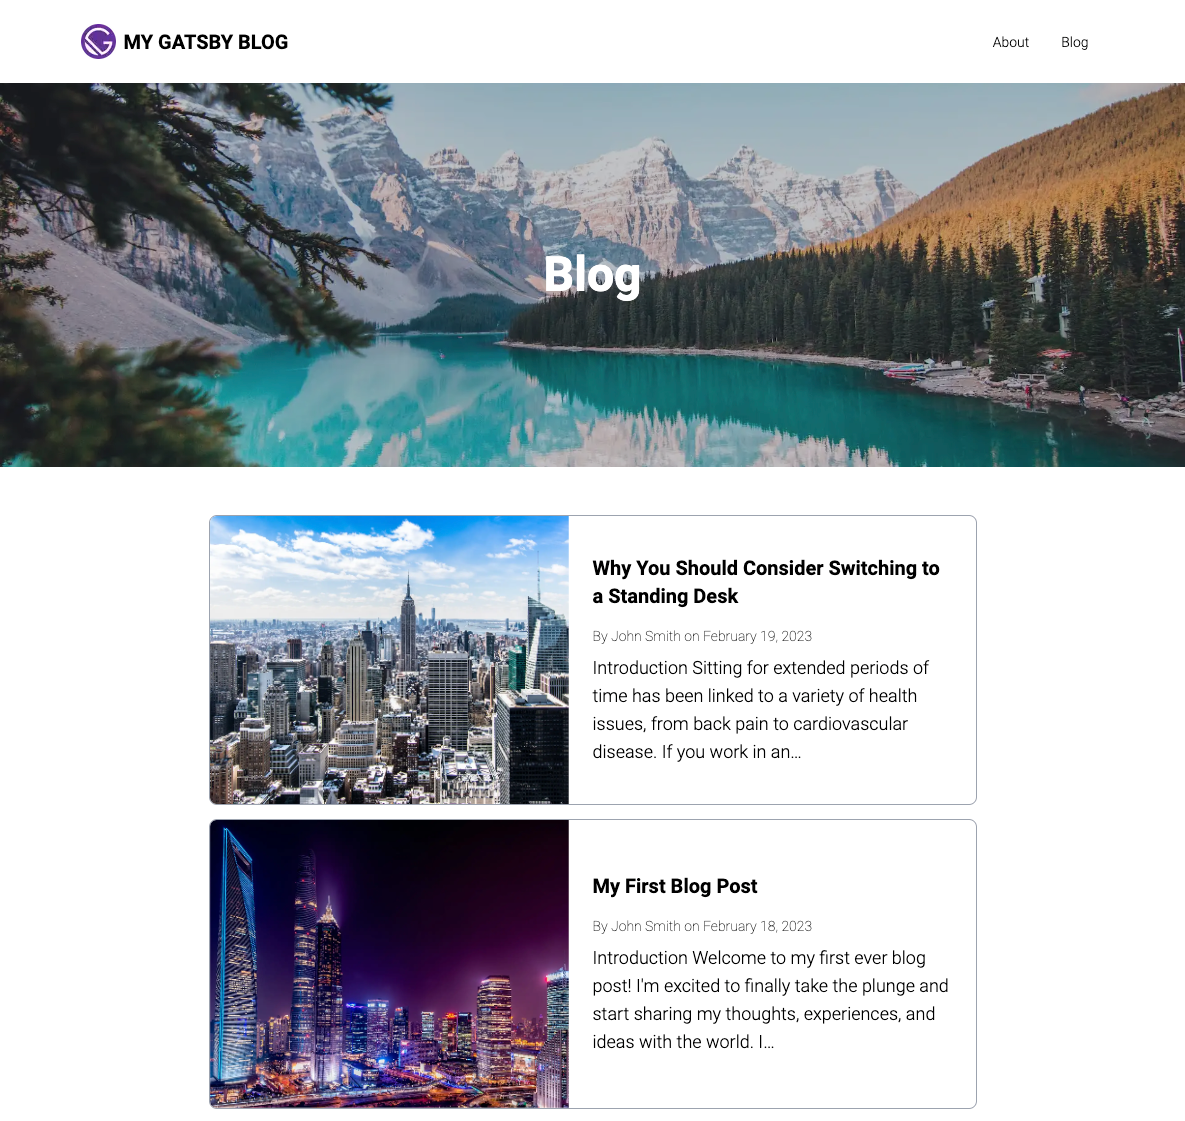 Blog list page with featured images